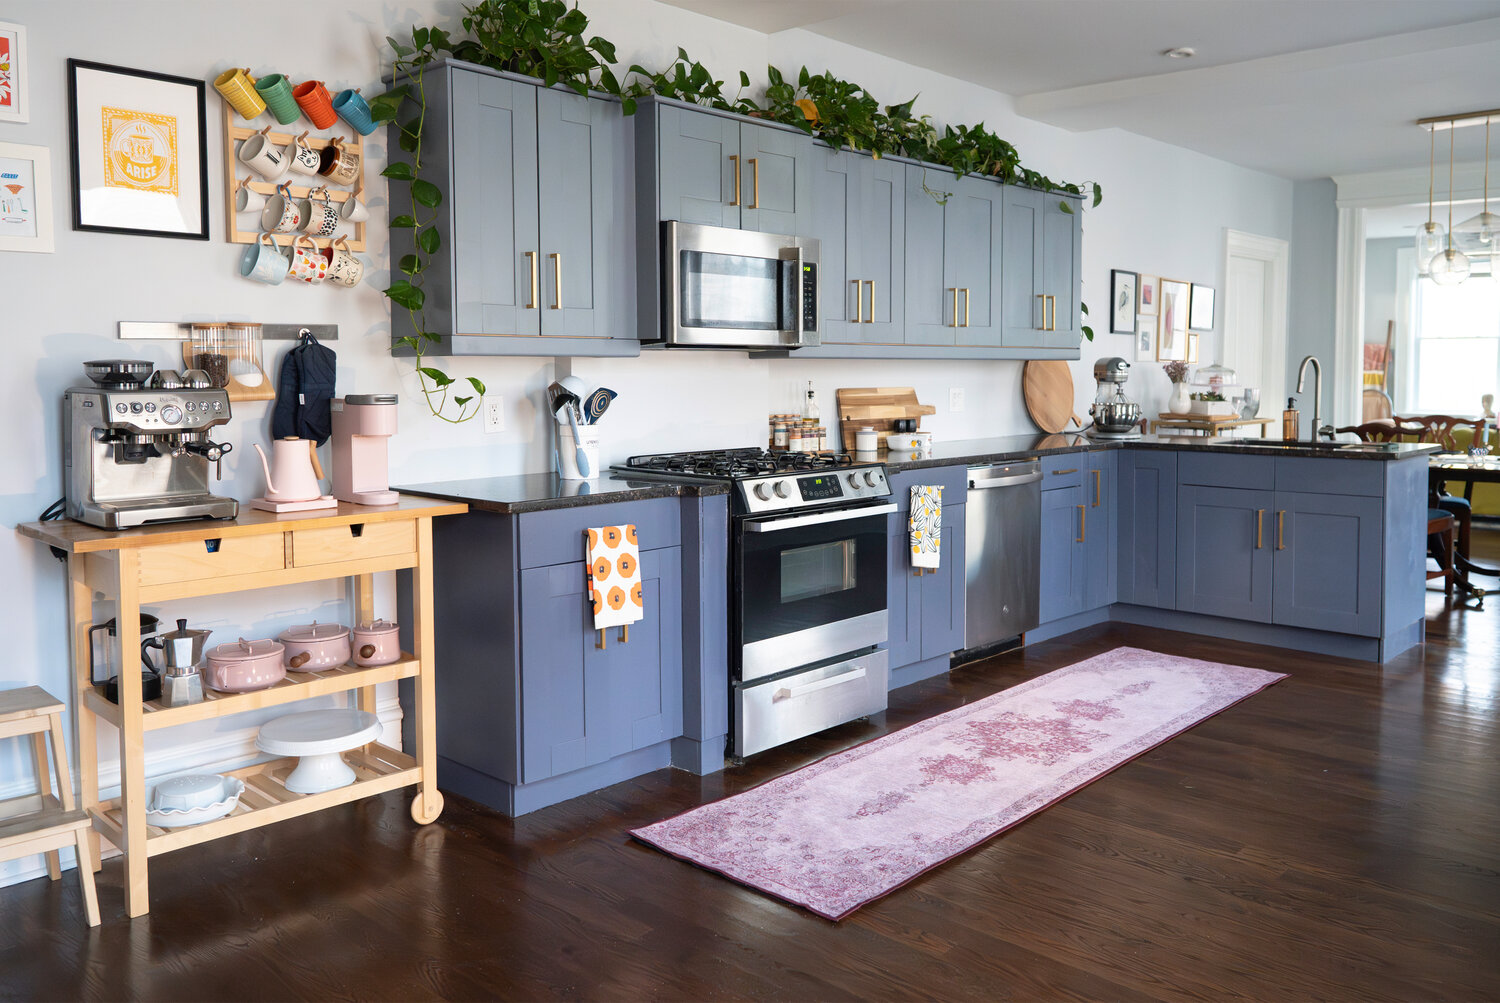 Natural woods and deep blues are a cohesive element throughout the home